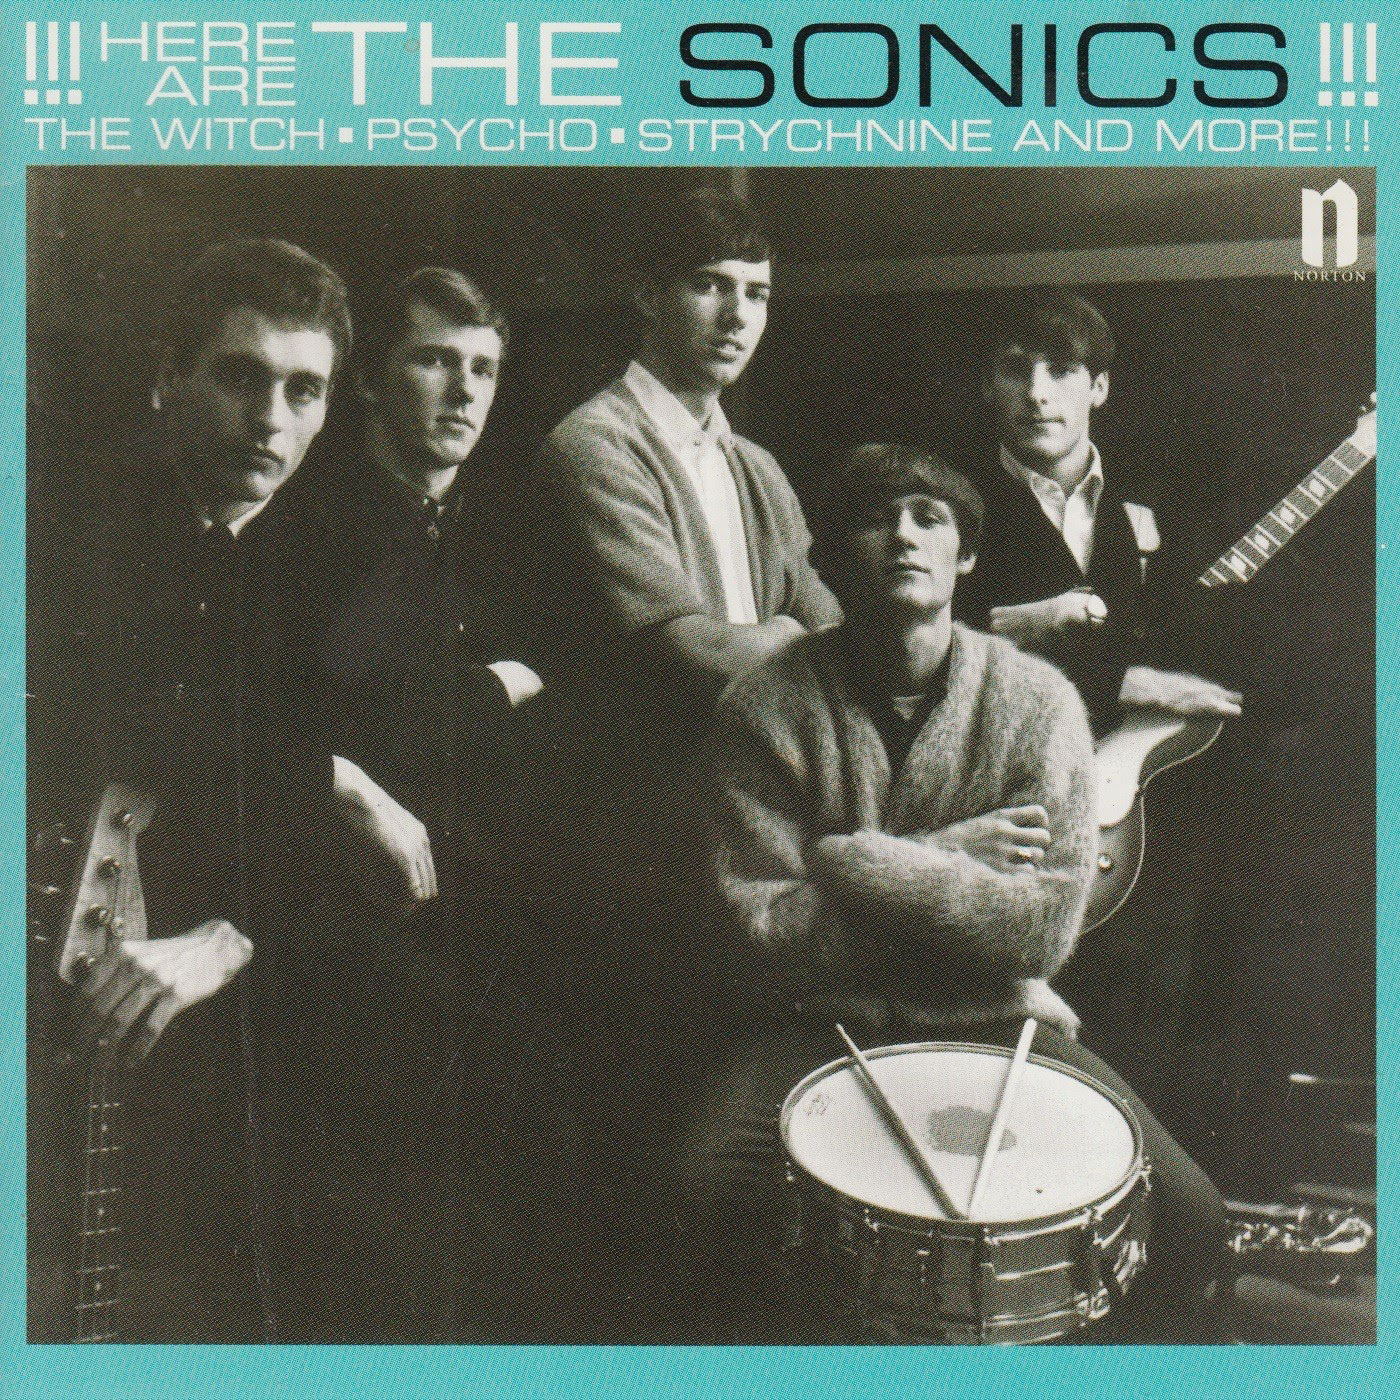 049 The Sonics – Here Are the Sonics